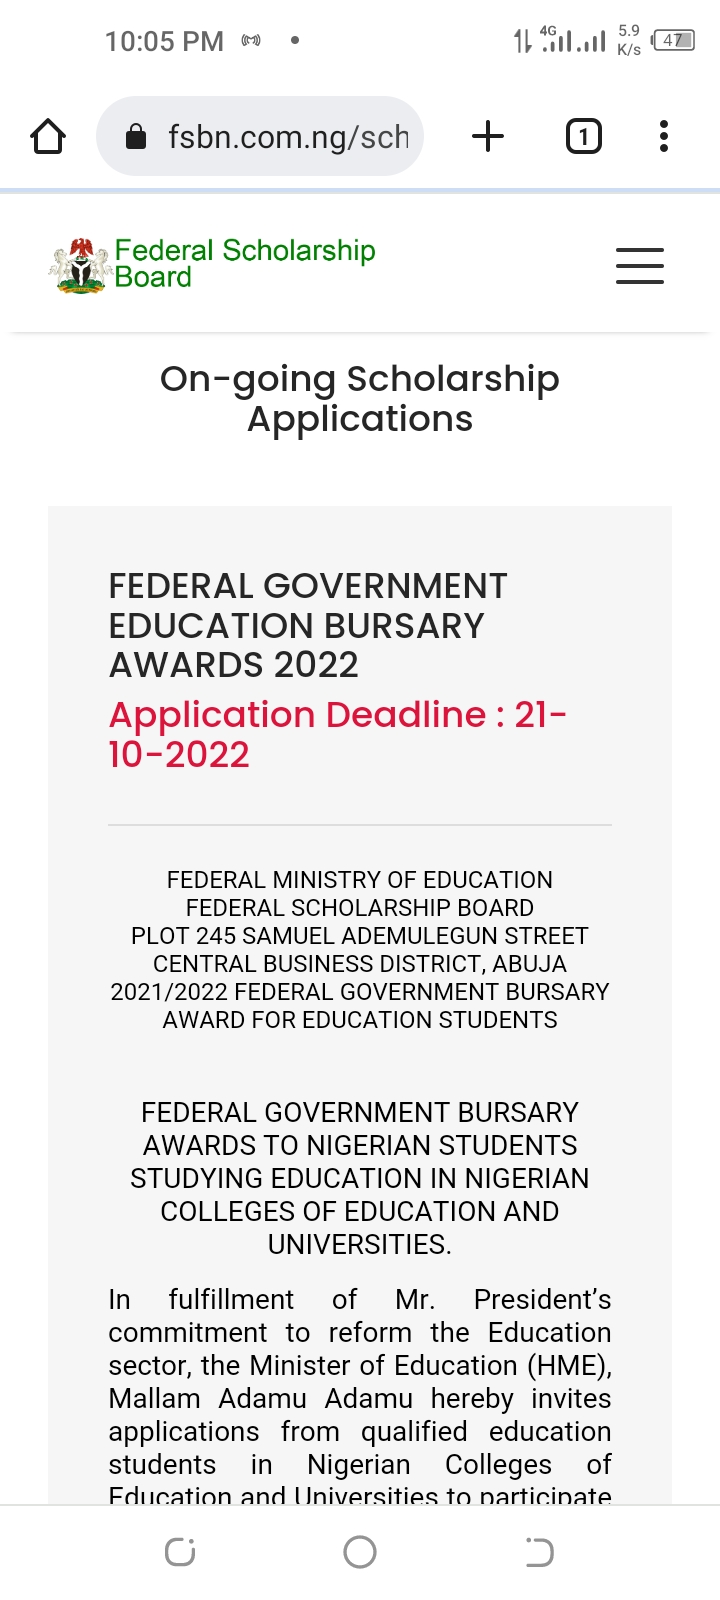 Big Opportunity To All Education Students: Federal Government Open Scholarship Portal For Degree In Education and NCE Students